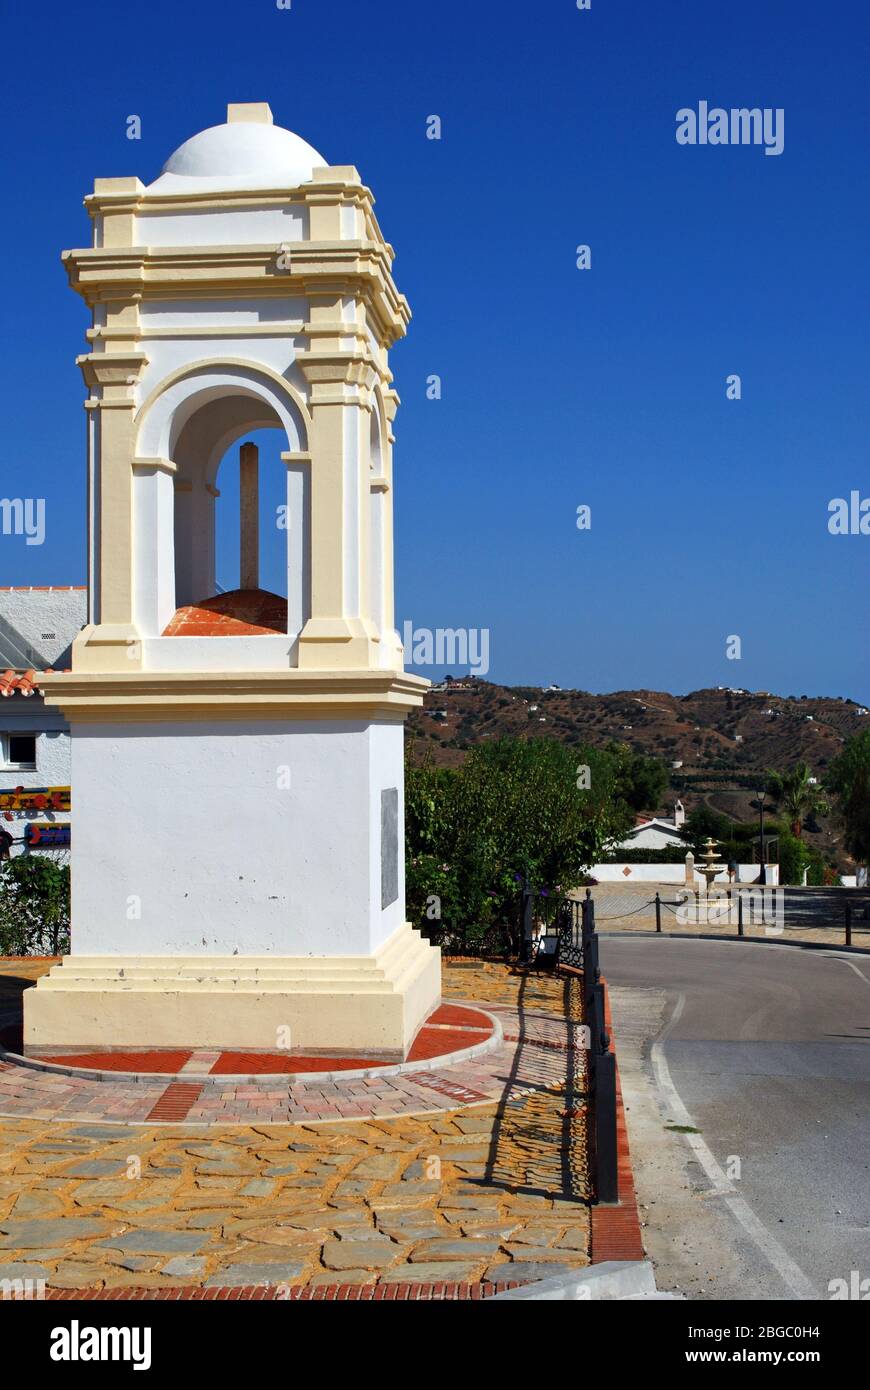 Monument at entrance to village, Macharaviaya, Malaga Province, Andalucia, Spain, Western Europe. Stock Photo